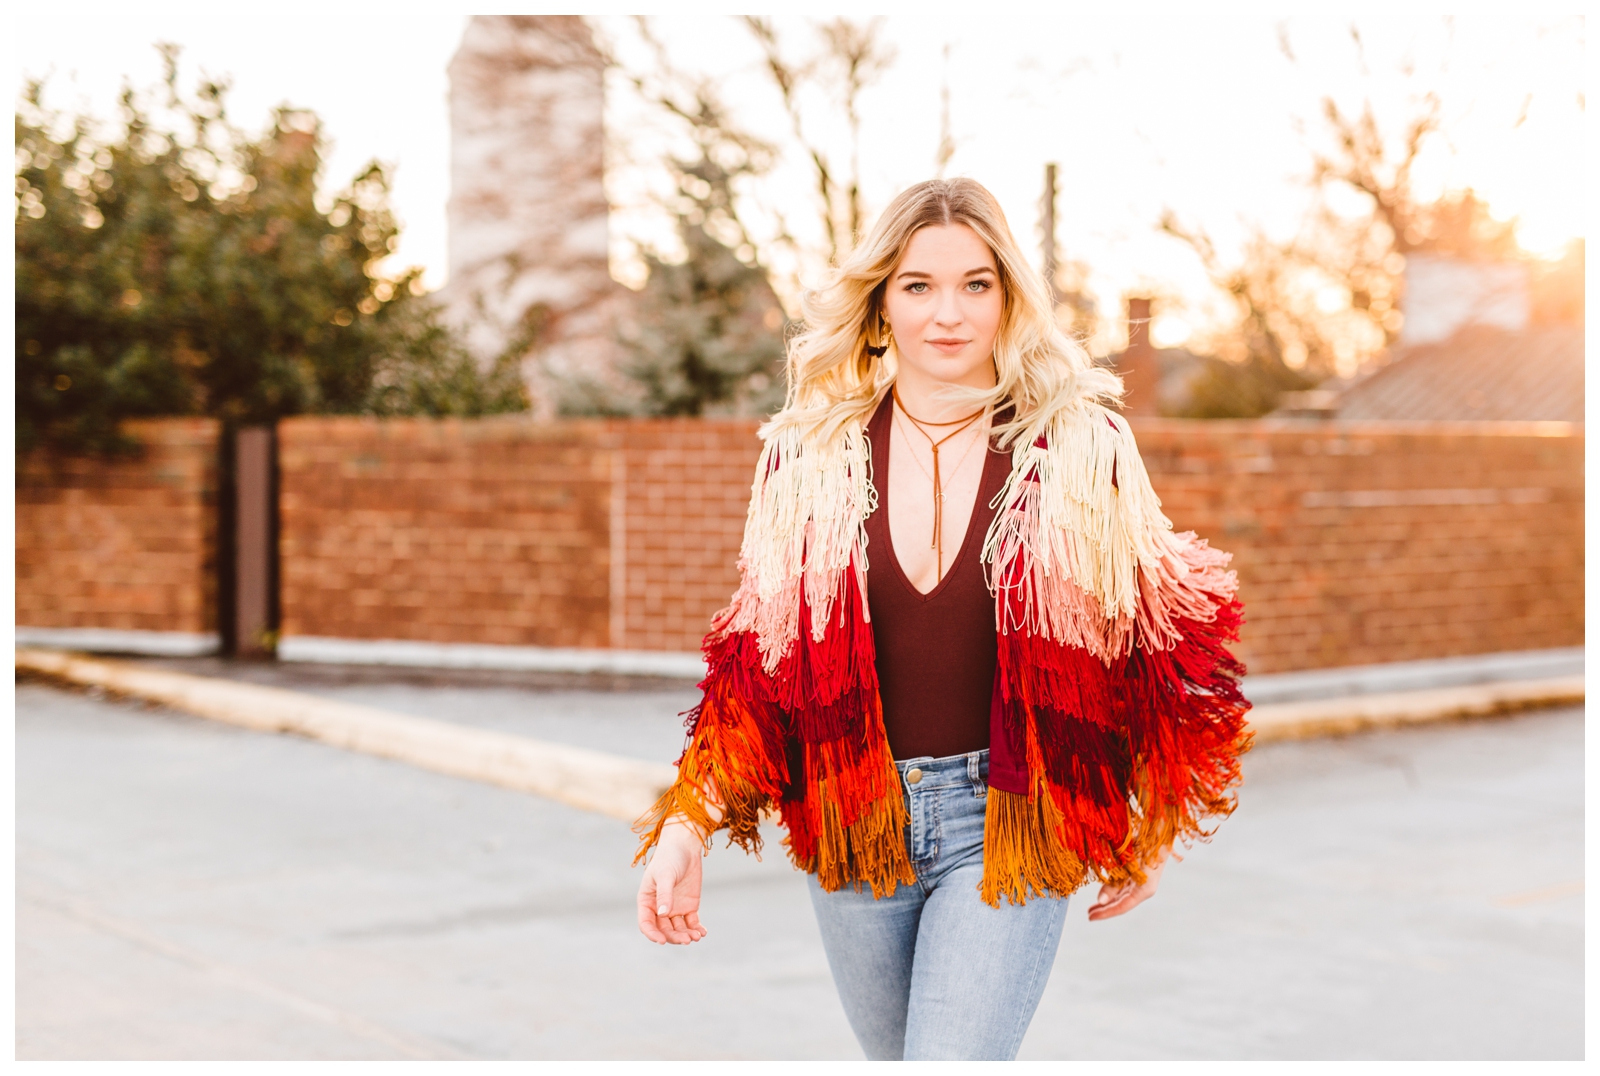 Quirky and Colorful Senior Portrait Session Inspiration - Downtown Annapolis, Maryland - Brooke Michelle Photography